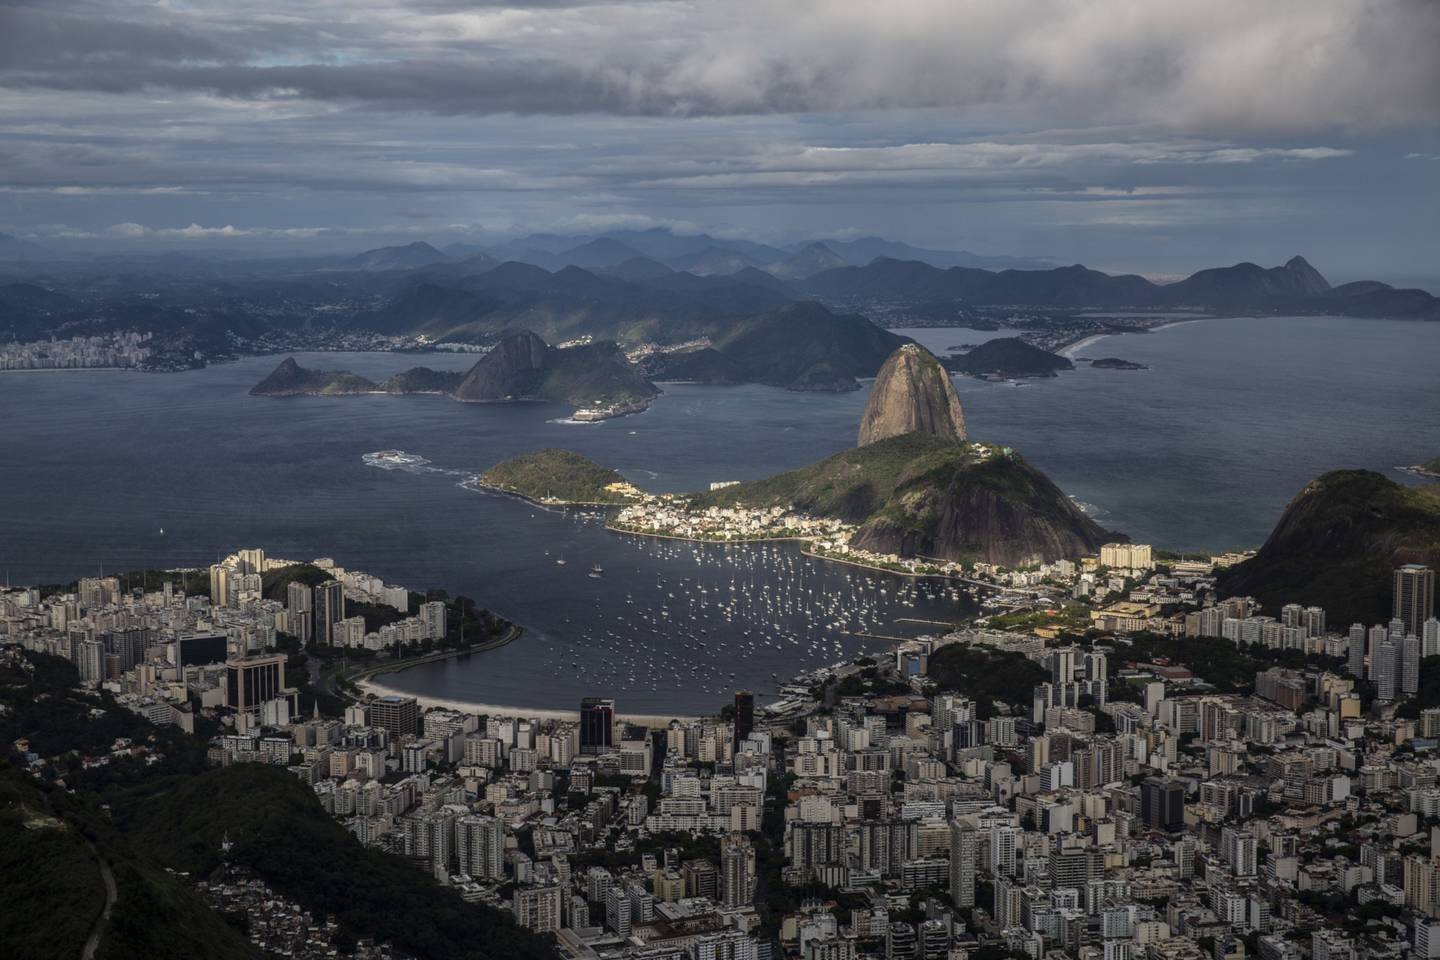 The view from the mountain where the Christ the Redeemer statue is located during its 90th anniversary in Rio de Janeiro, Brazil, on Tuesday, Oct. 12, 2021. Elected one of the seven wonders of the modern world, the statue celebrates its 90th anniversary as Brazil's most famous landmark. Photographer: Dado Galdieri/Bloomberg